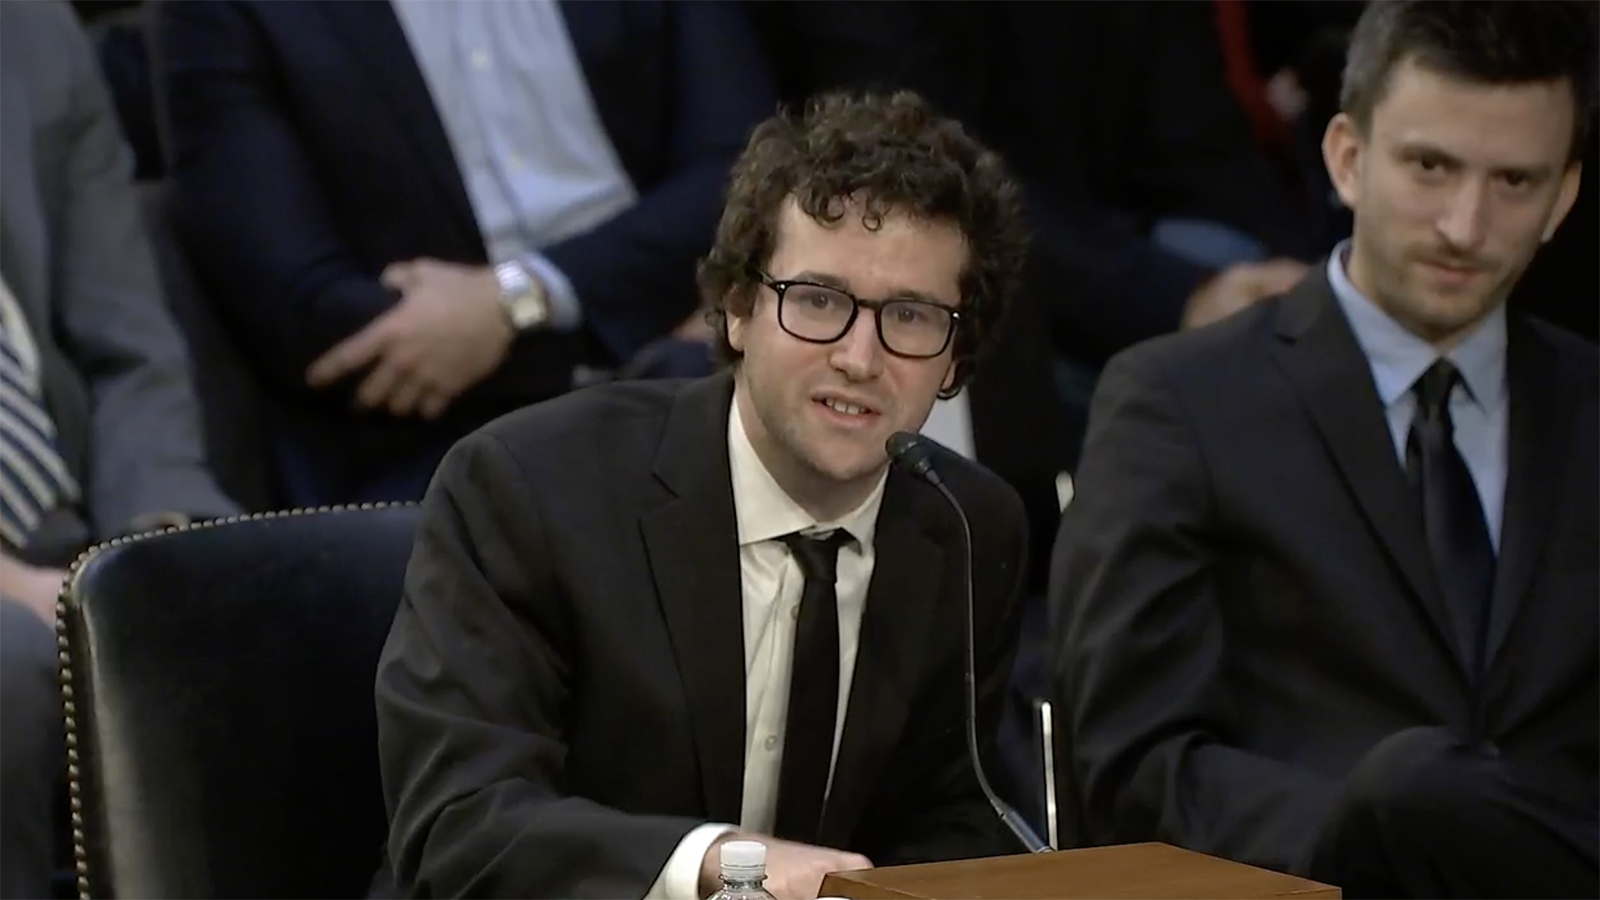 Clyde Lawrence, singer-songwriter and member of the band "Lawrence", testifying during the Senate Judiciary Committee hearing on the event ticketing industry's market practices today.